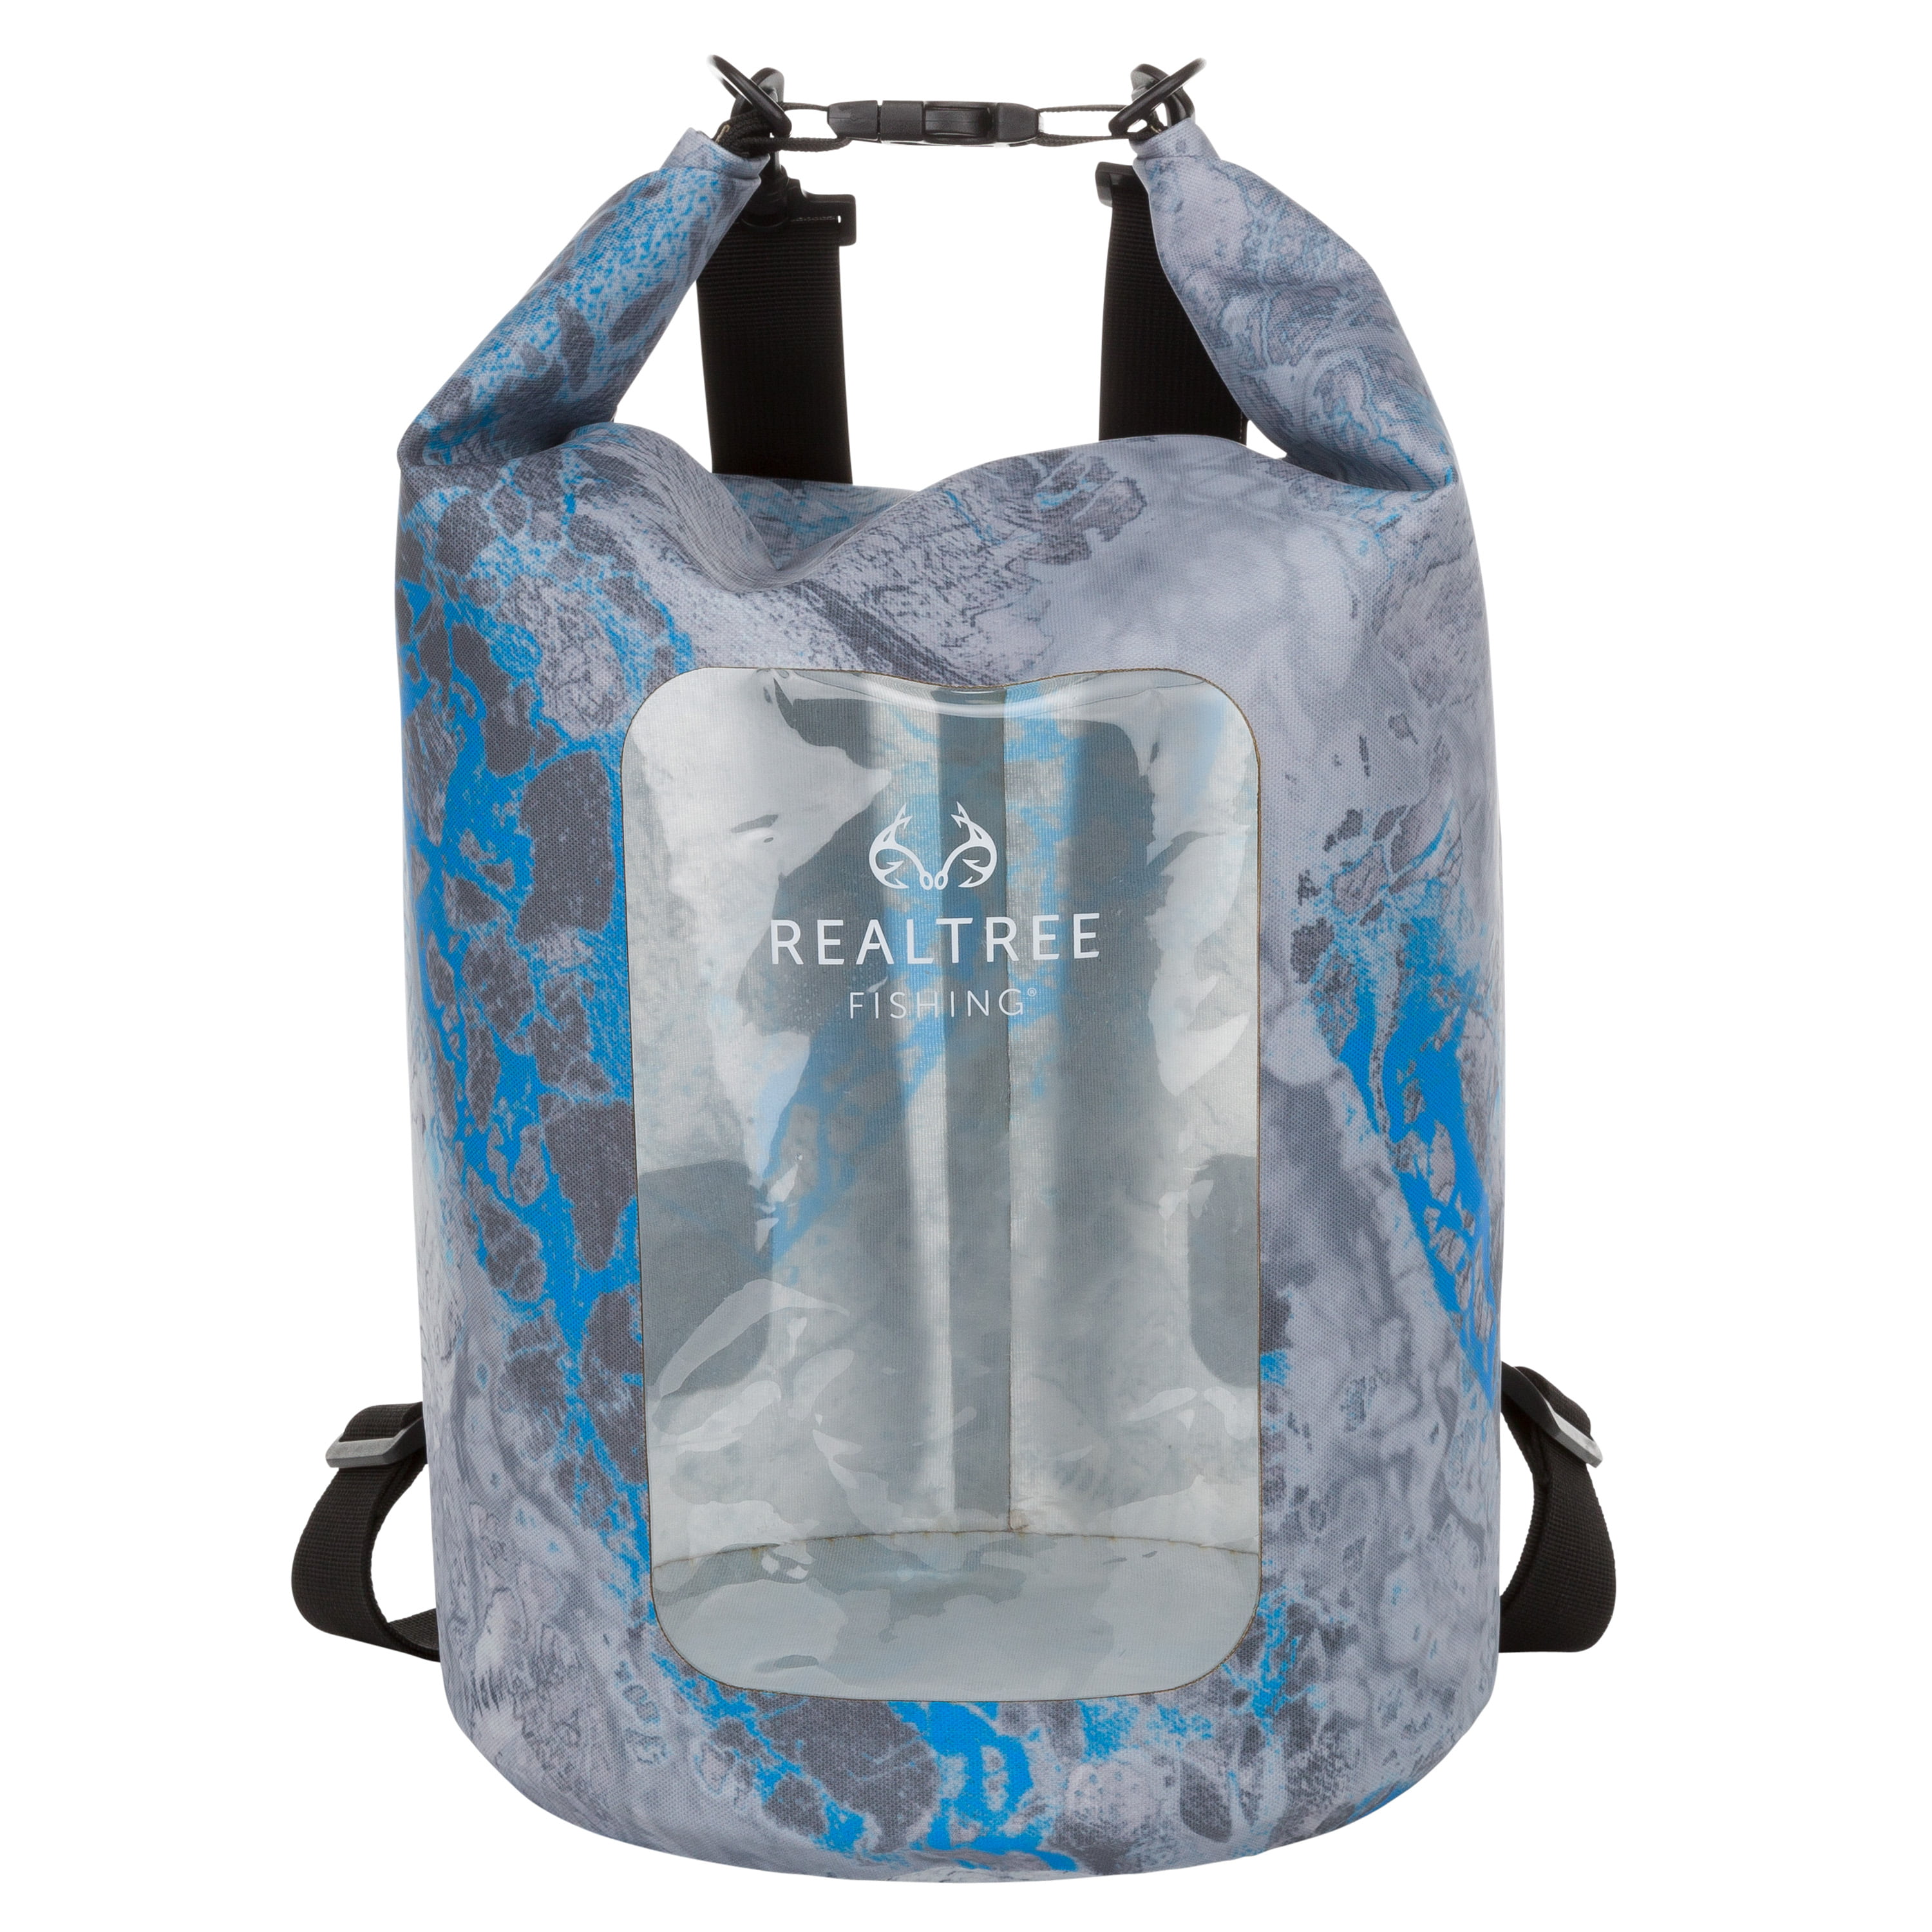 Realtree Wav3 20 L Roll Top Dry Bag, Unisex, Weather Resistant, Gray